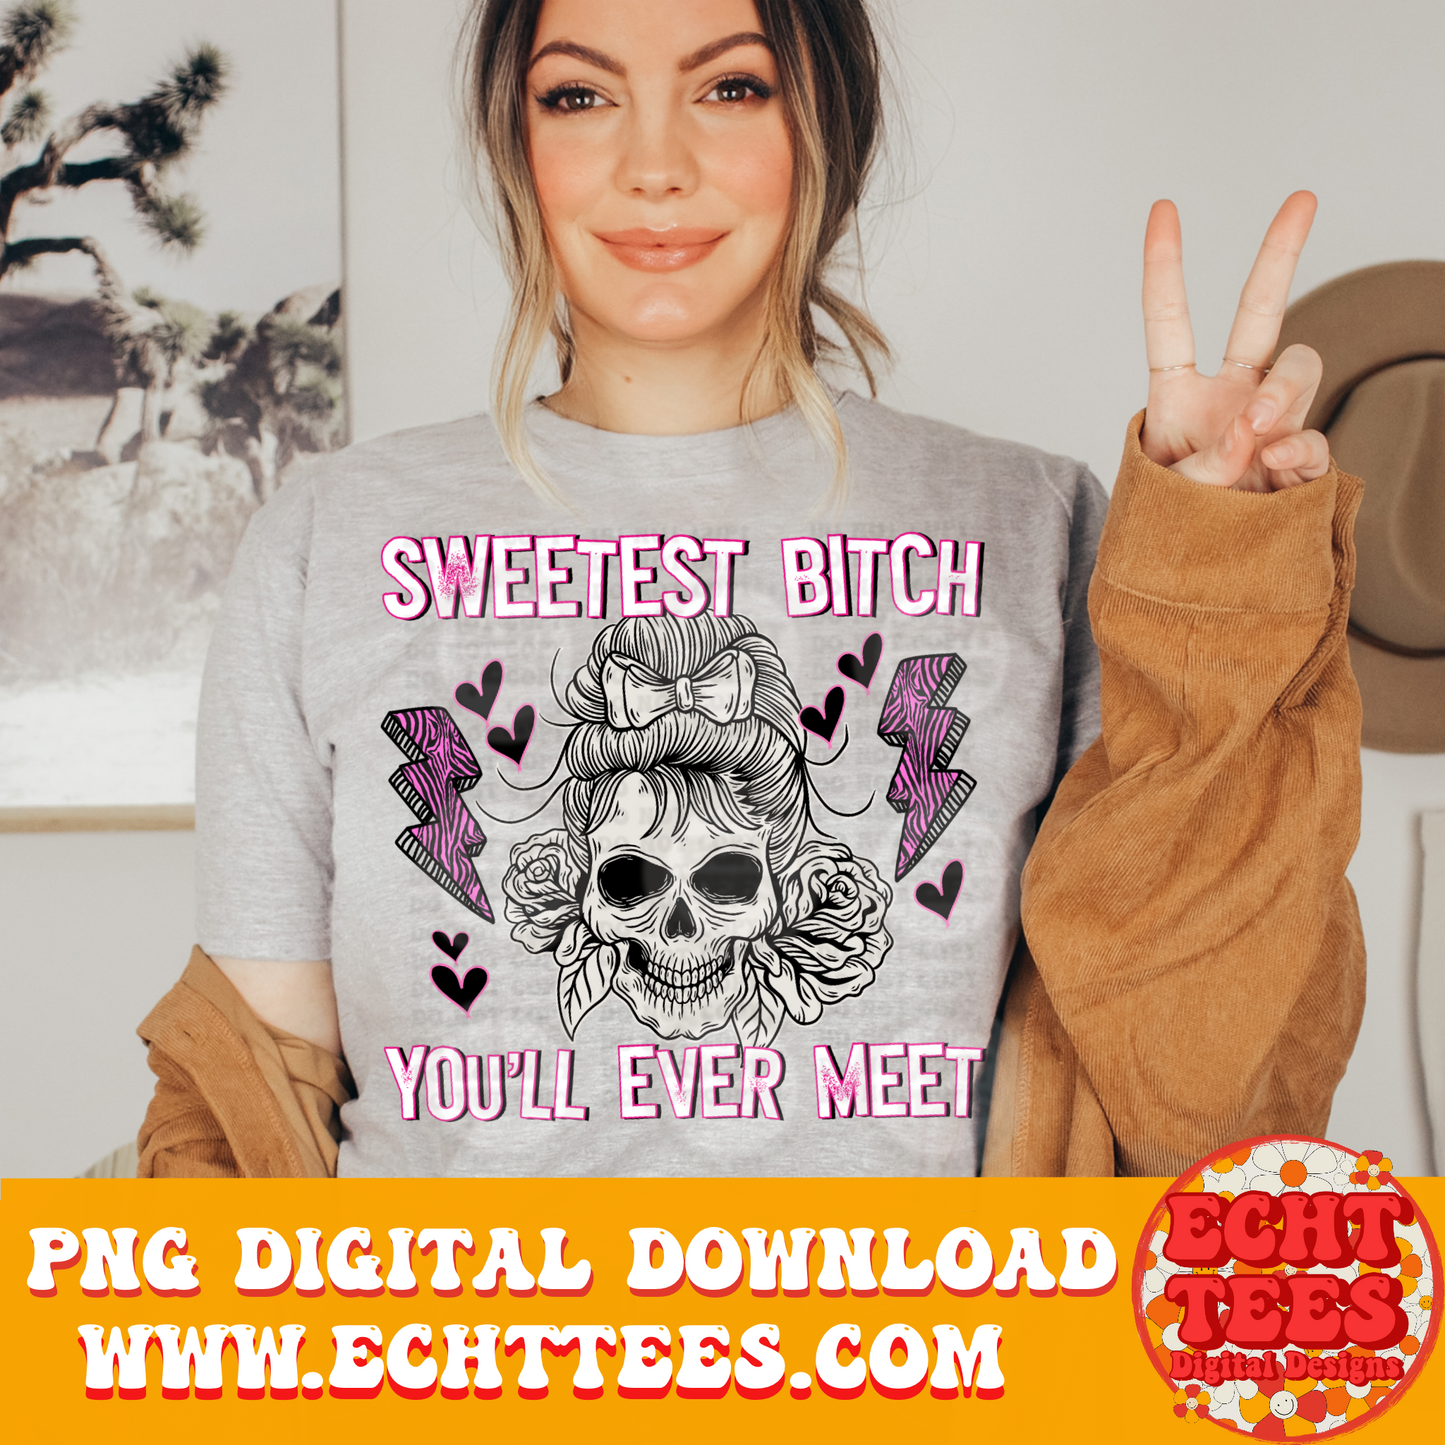 Sweetest Bitch PNG Digital Download